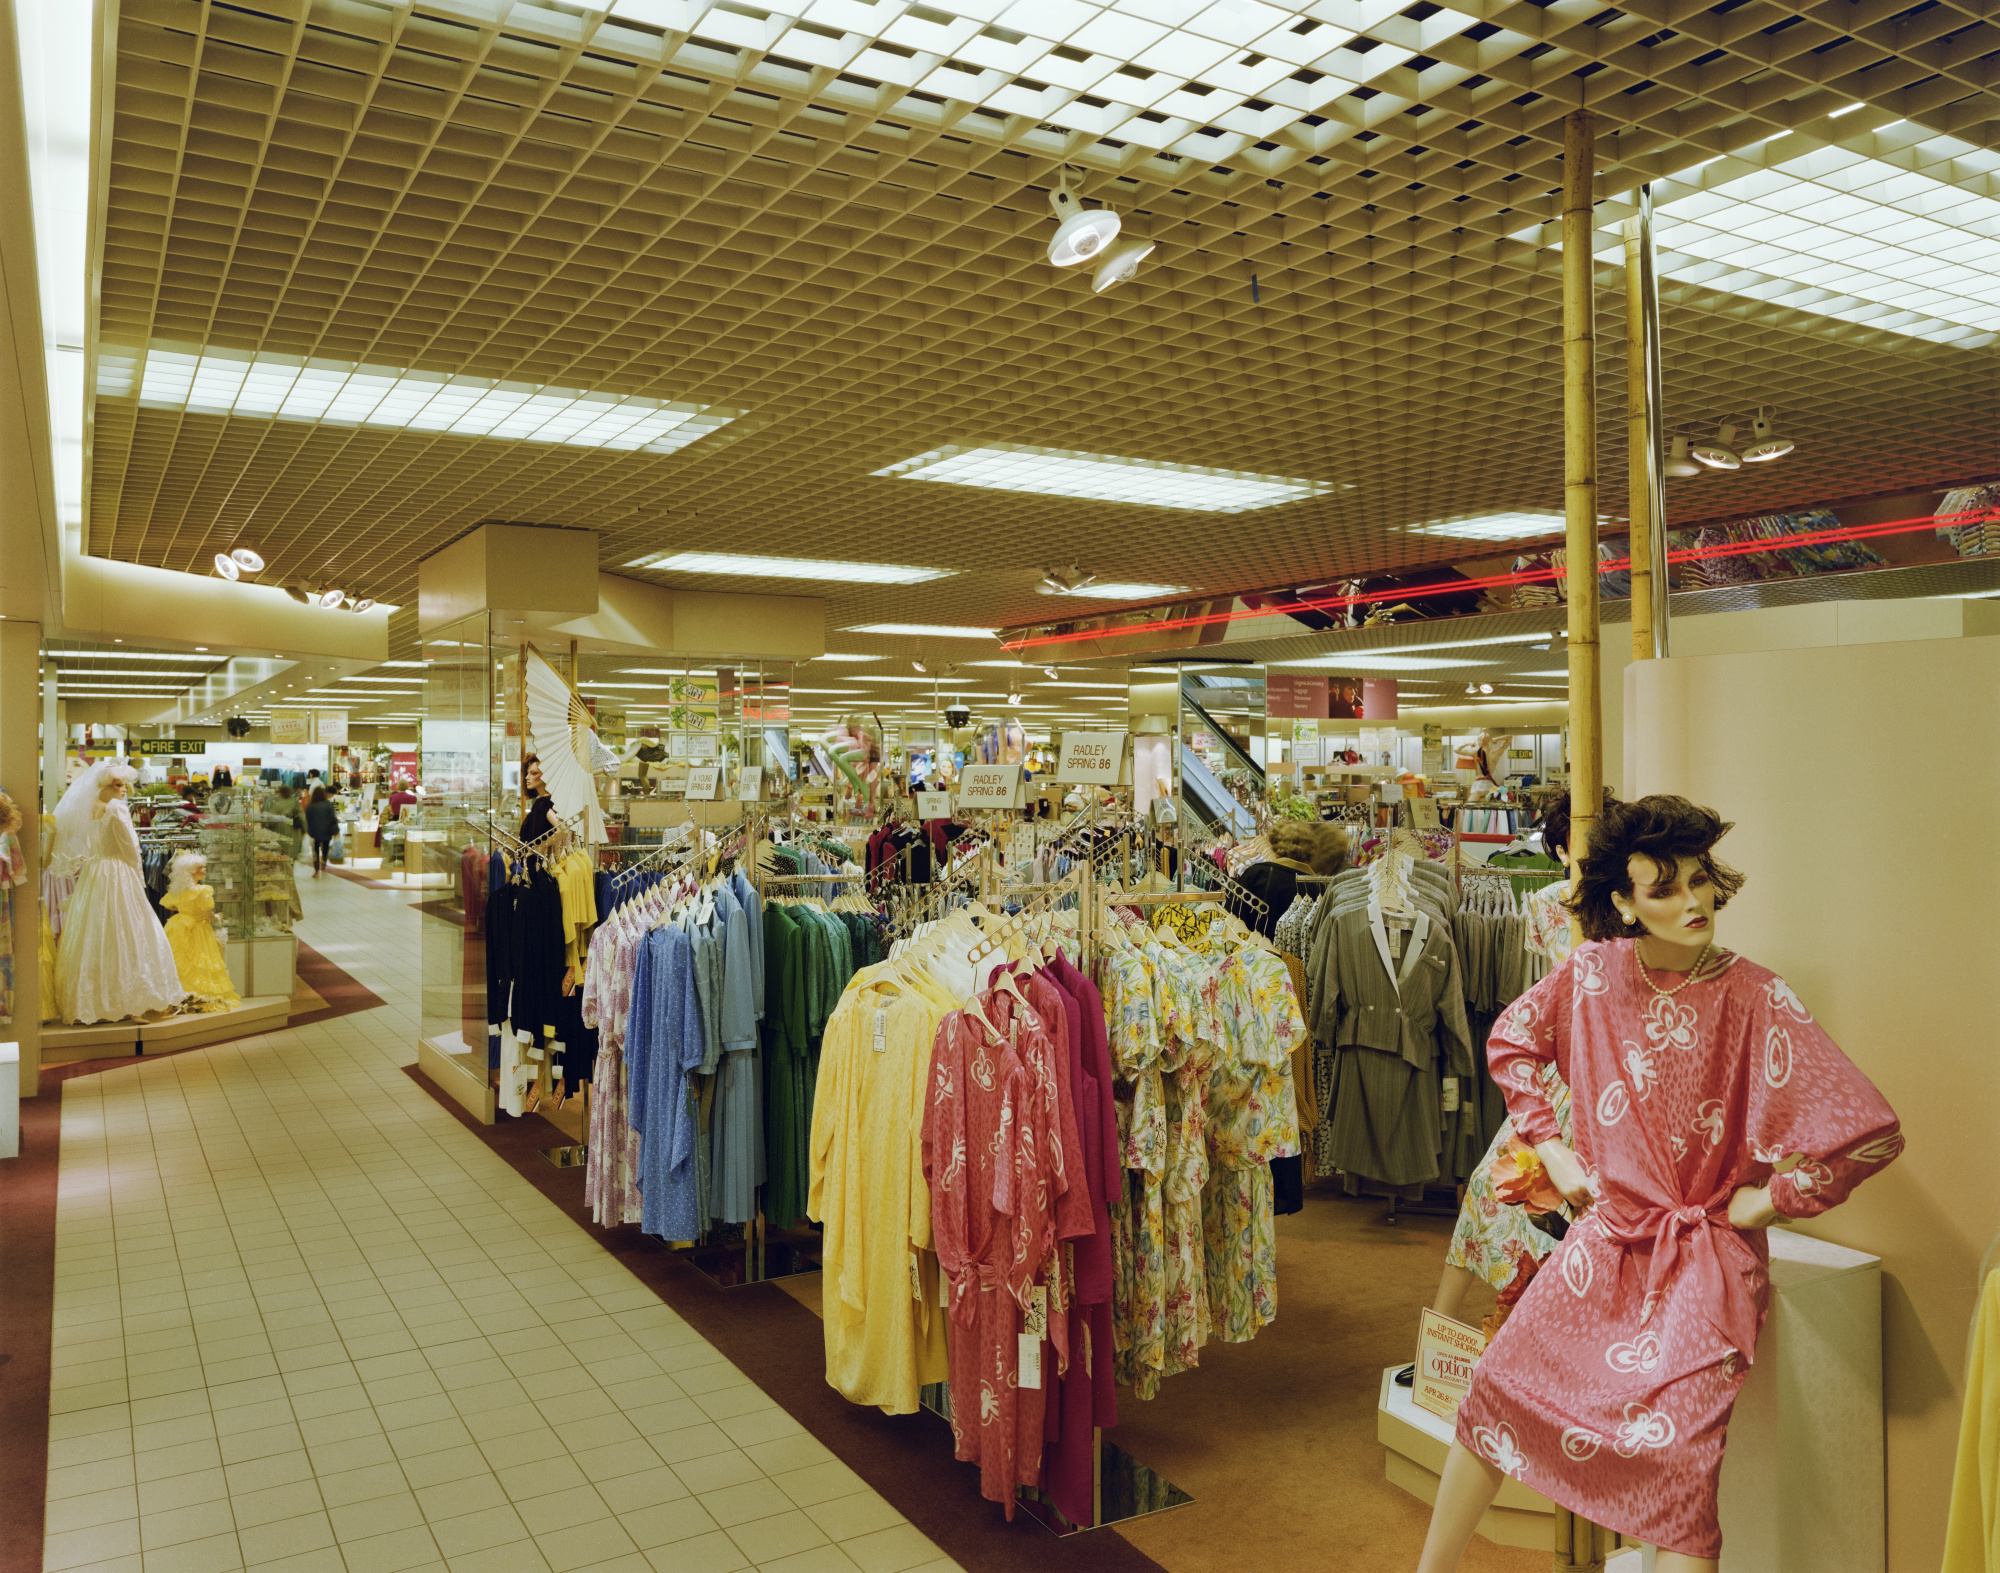 Colour photograph showing the womenswear department in the Allders store at Eastgate Shopping Centre. Colourful clothing is hanging on display stands and a mannequin in the foreground is modelling a pink dress.